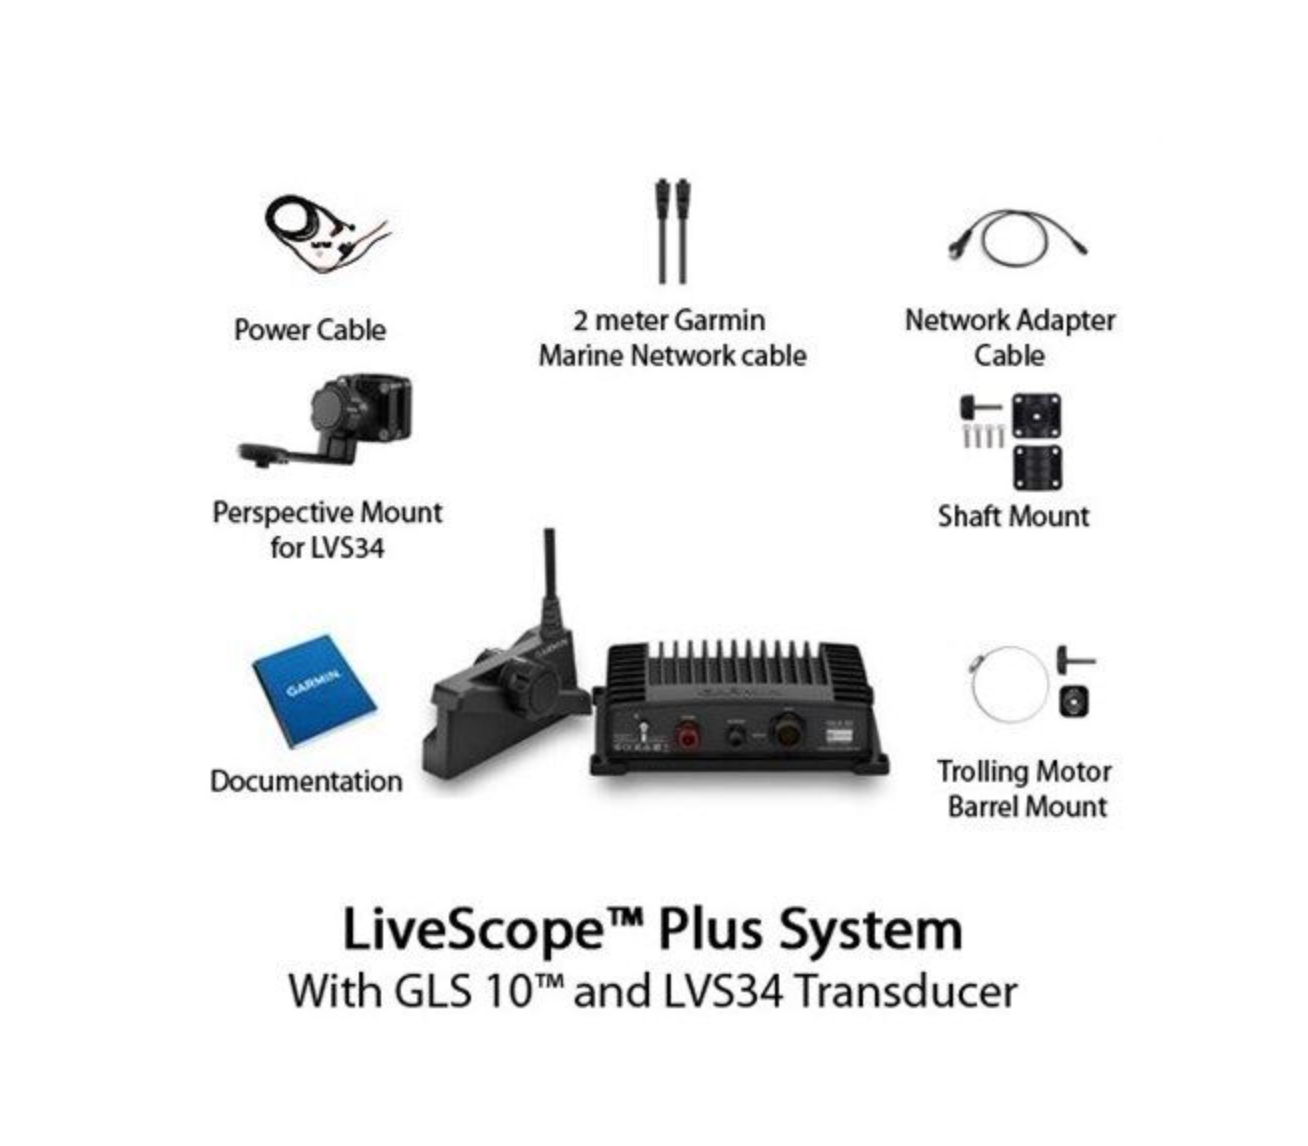 Garmin LiveScope Plus System with LVS34 Transducer and GLS10 